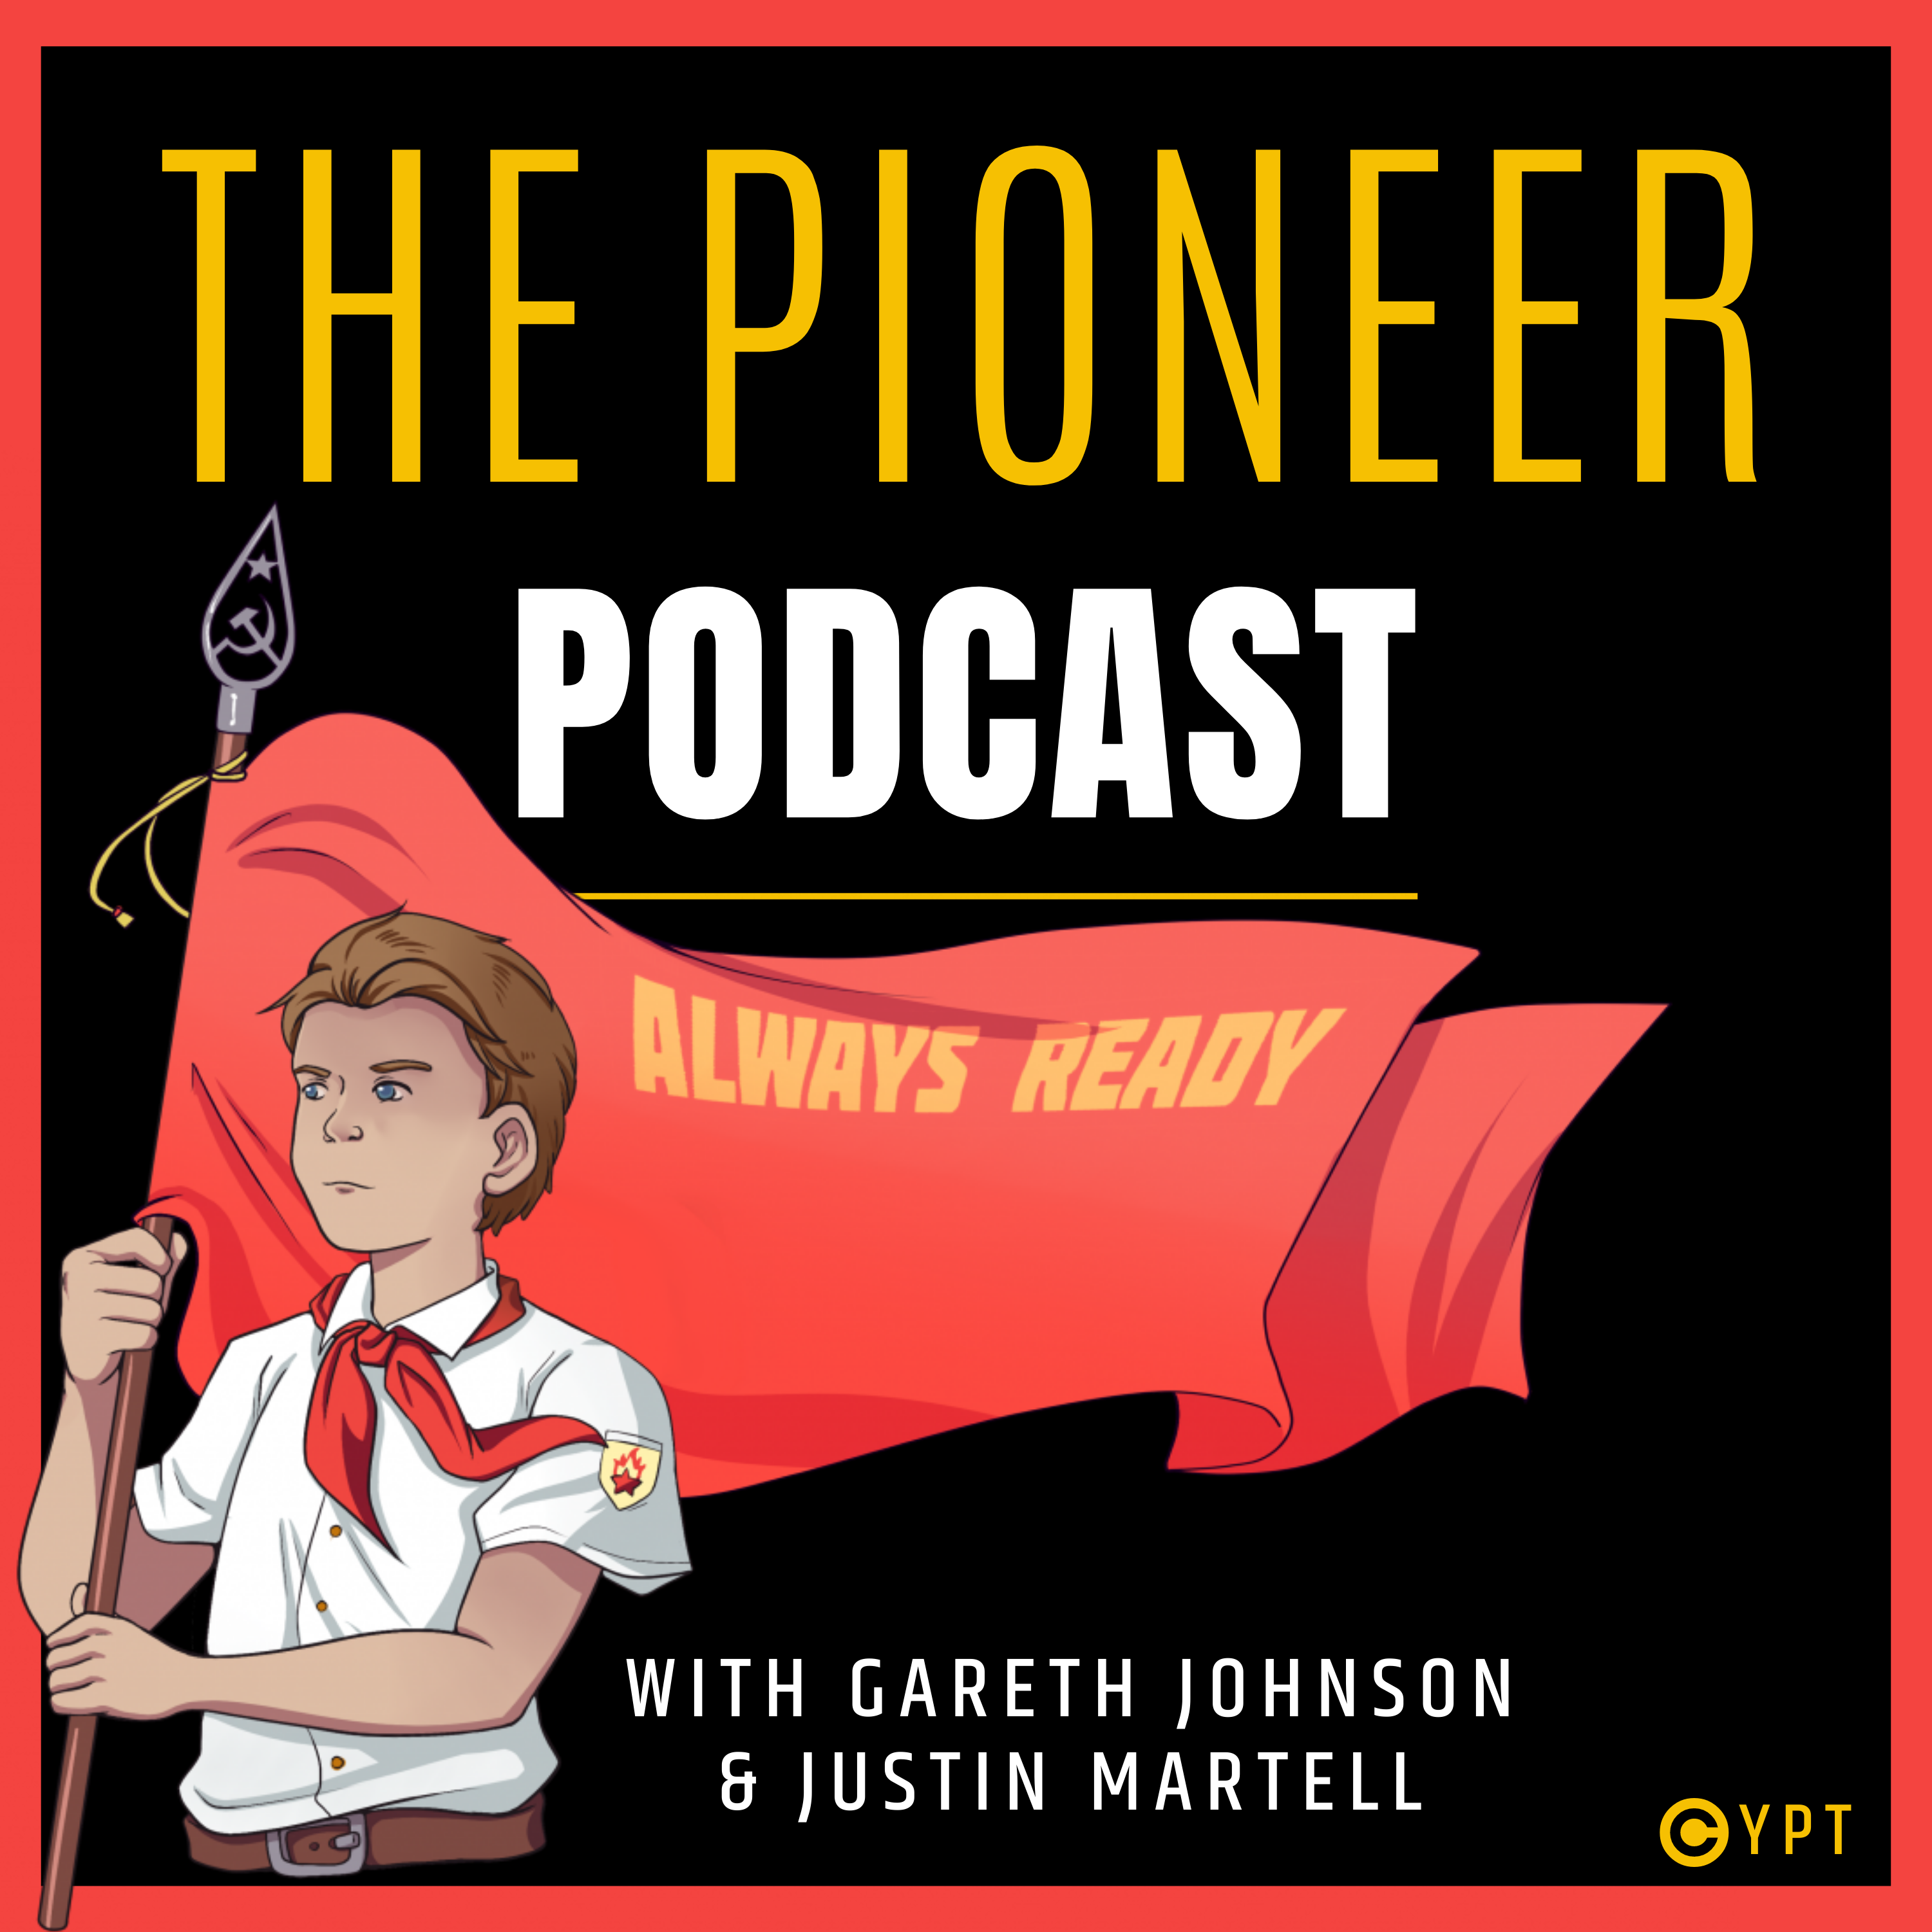 Young Pioneer Podcast Cover (2)